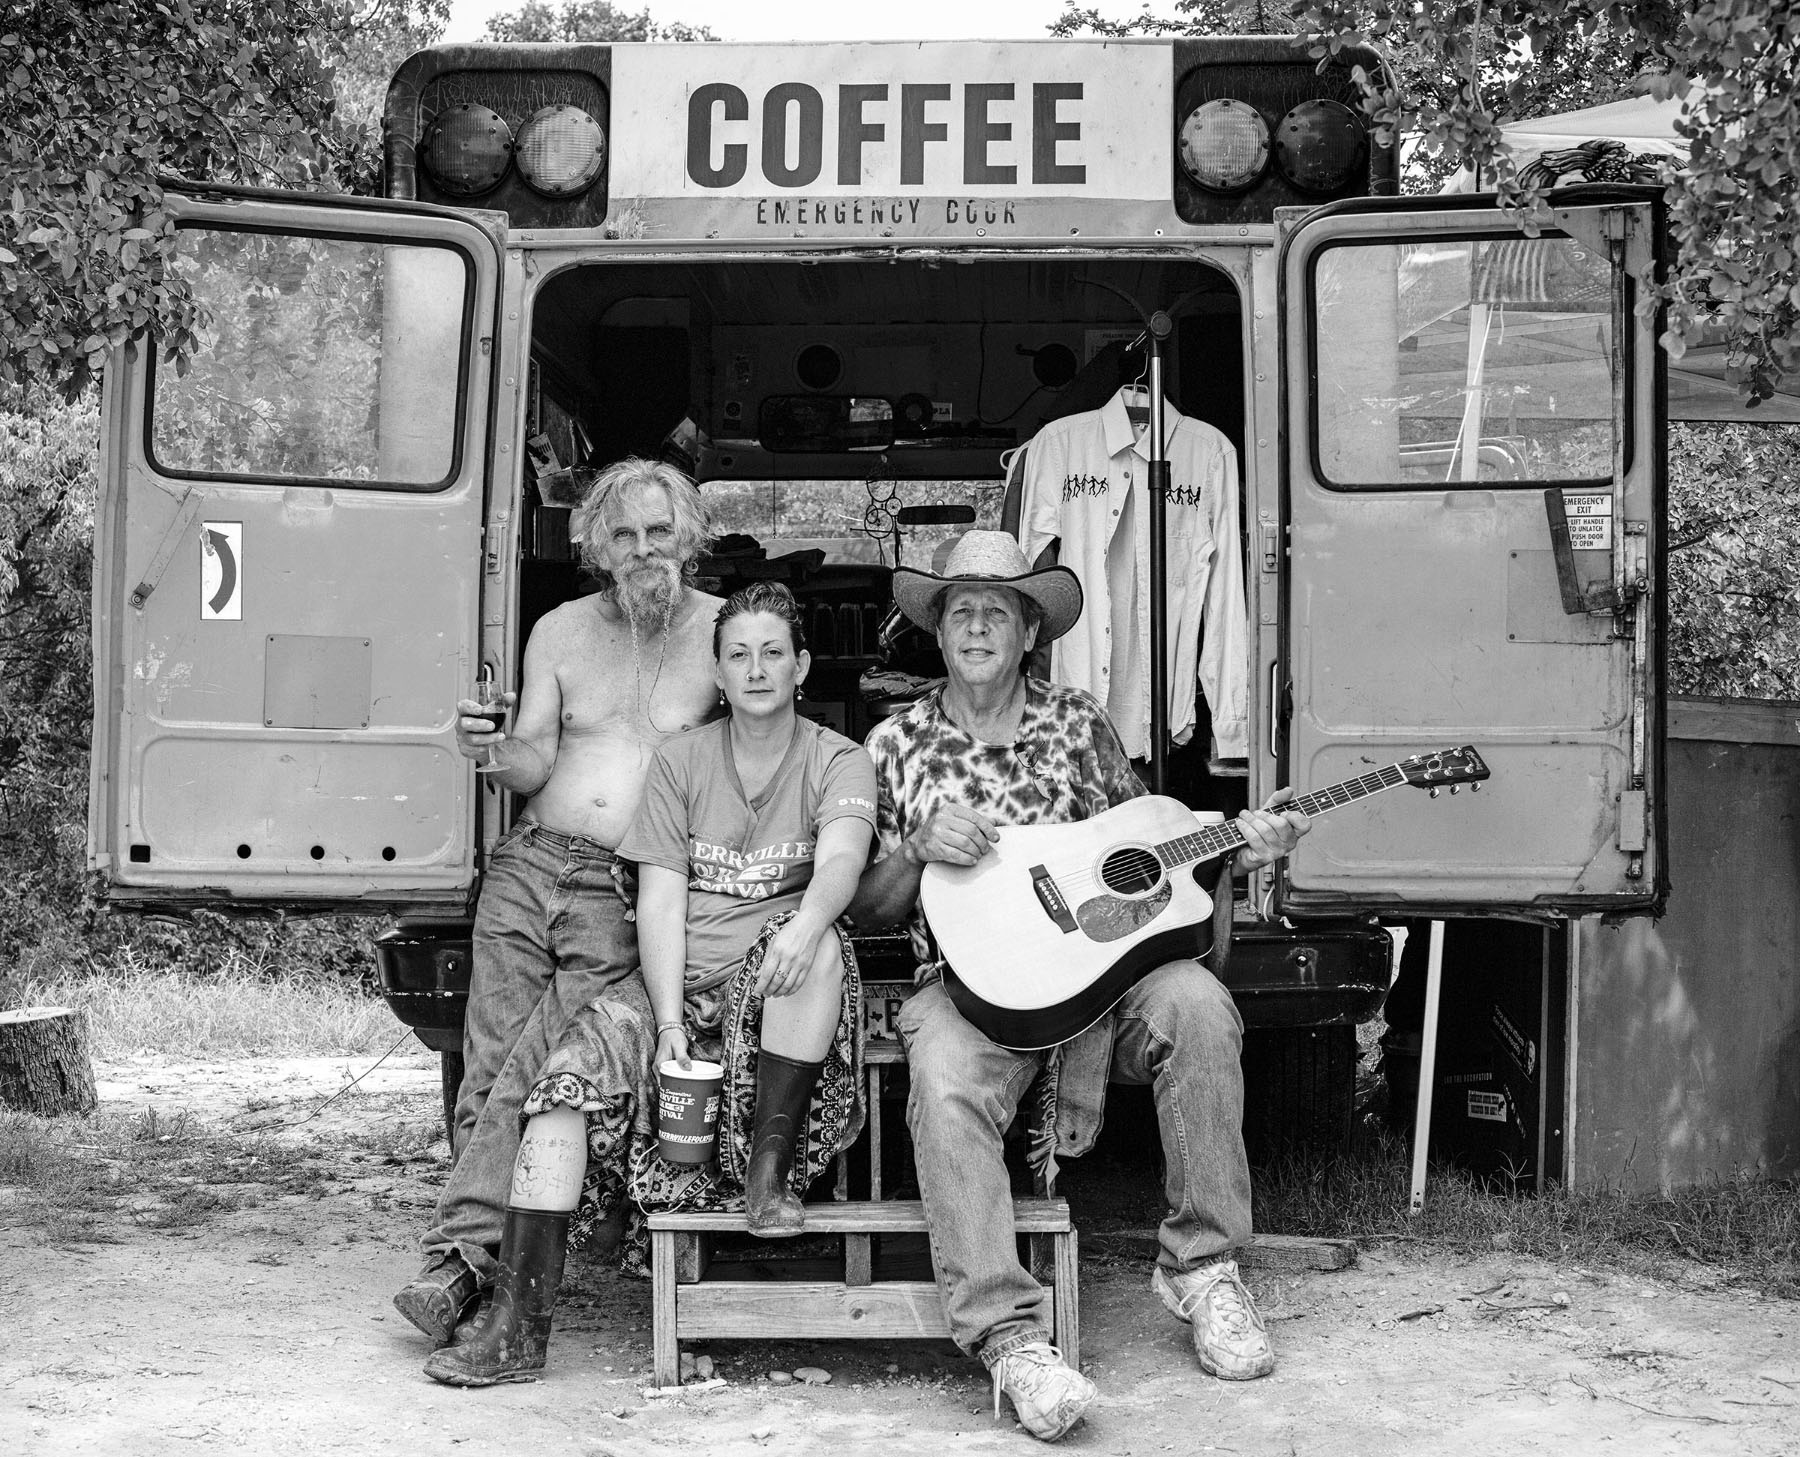 A group of men sit in the back of a bus marked "COFFEE"